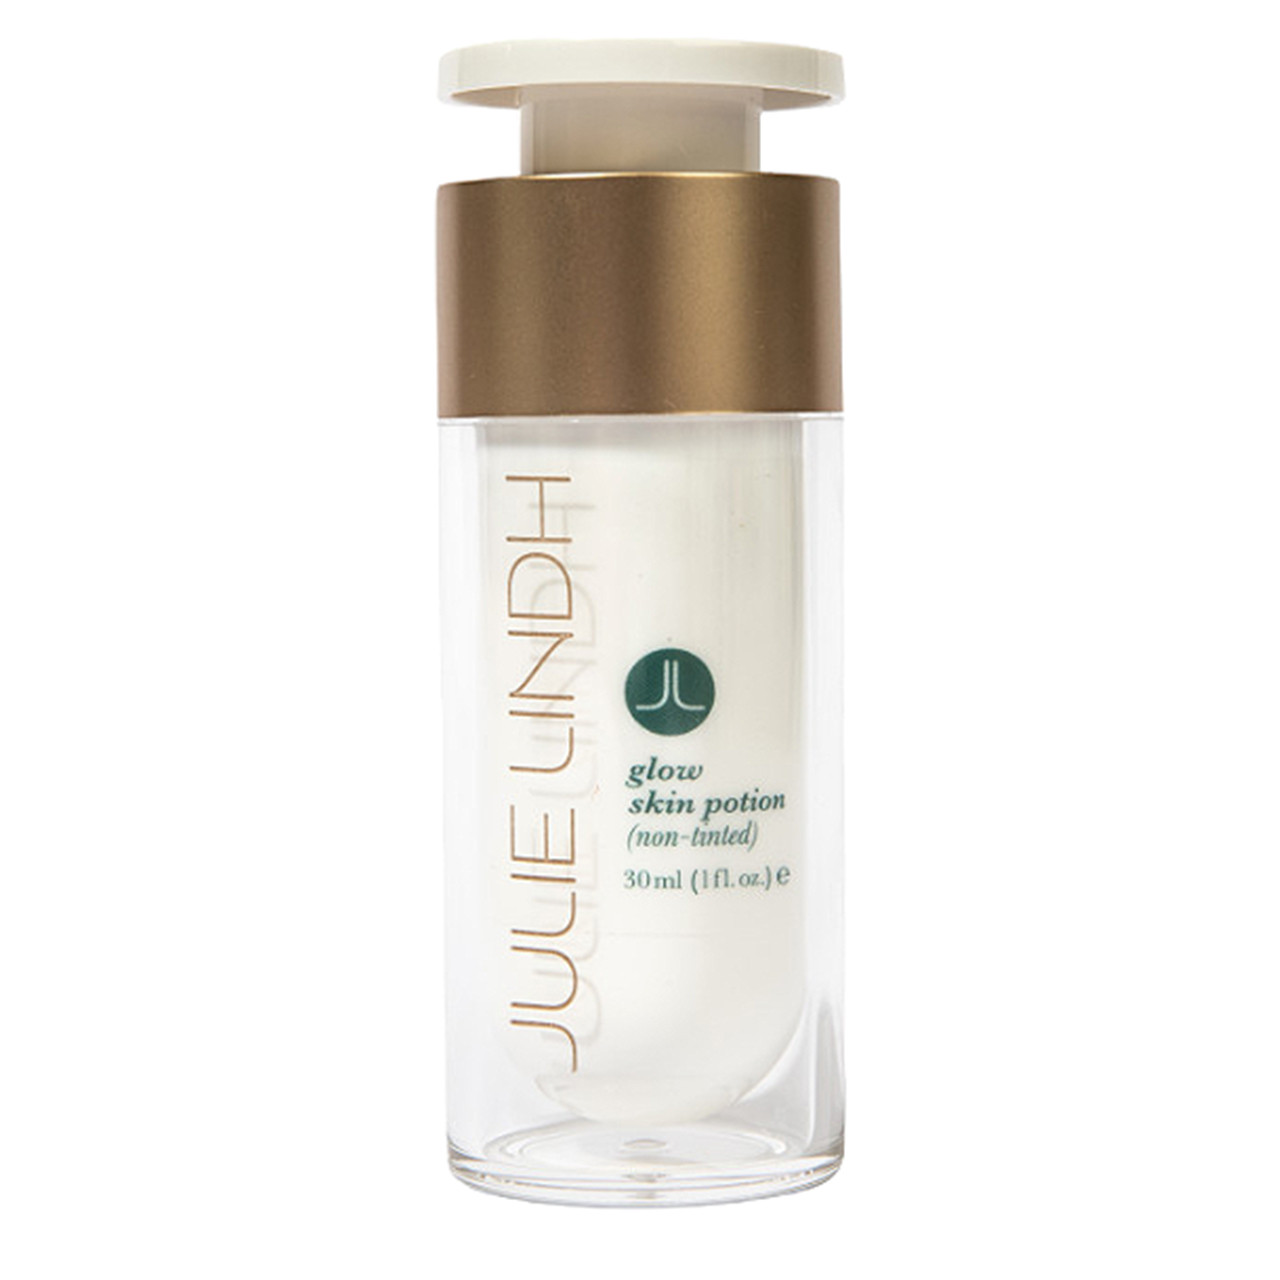 Julie Lindh Skin Expert Green Beauty Glow Skin Potion (Non-Tinted) - 1 oz